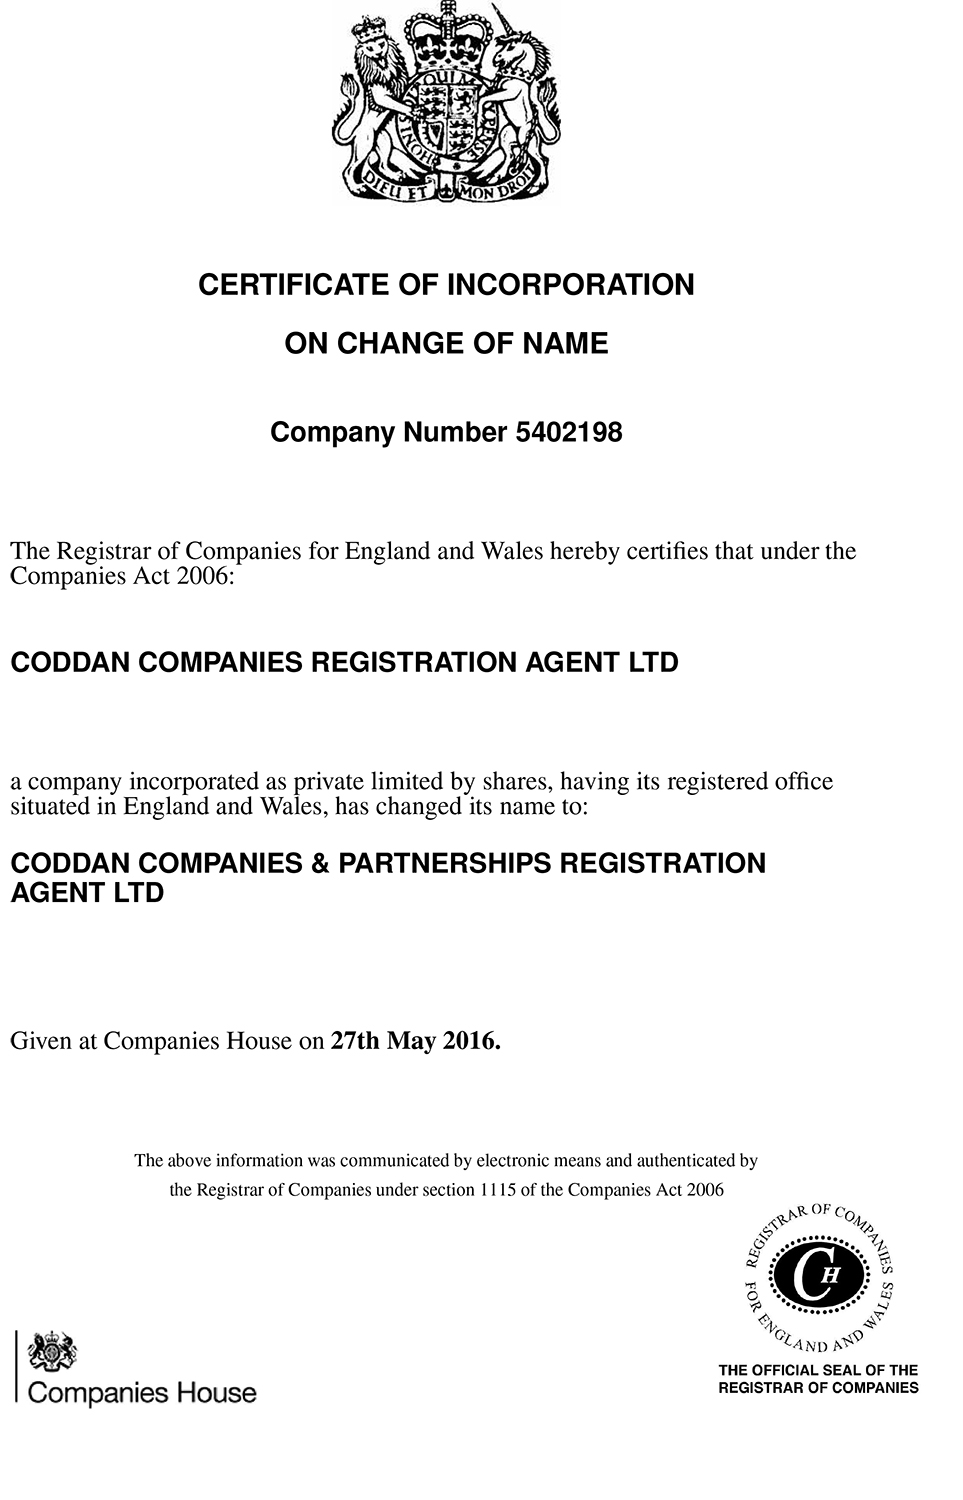 UK About Company Registration Expert  About Coddan Company For Share Certificate Template Companies House